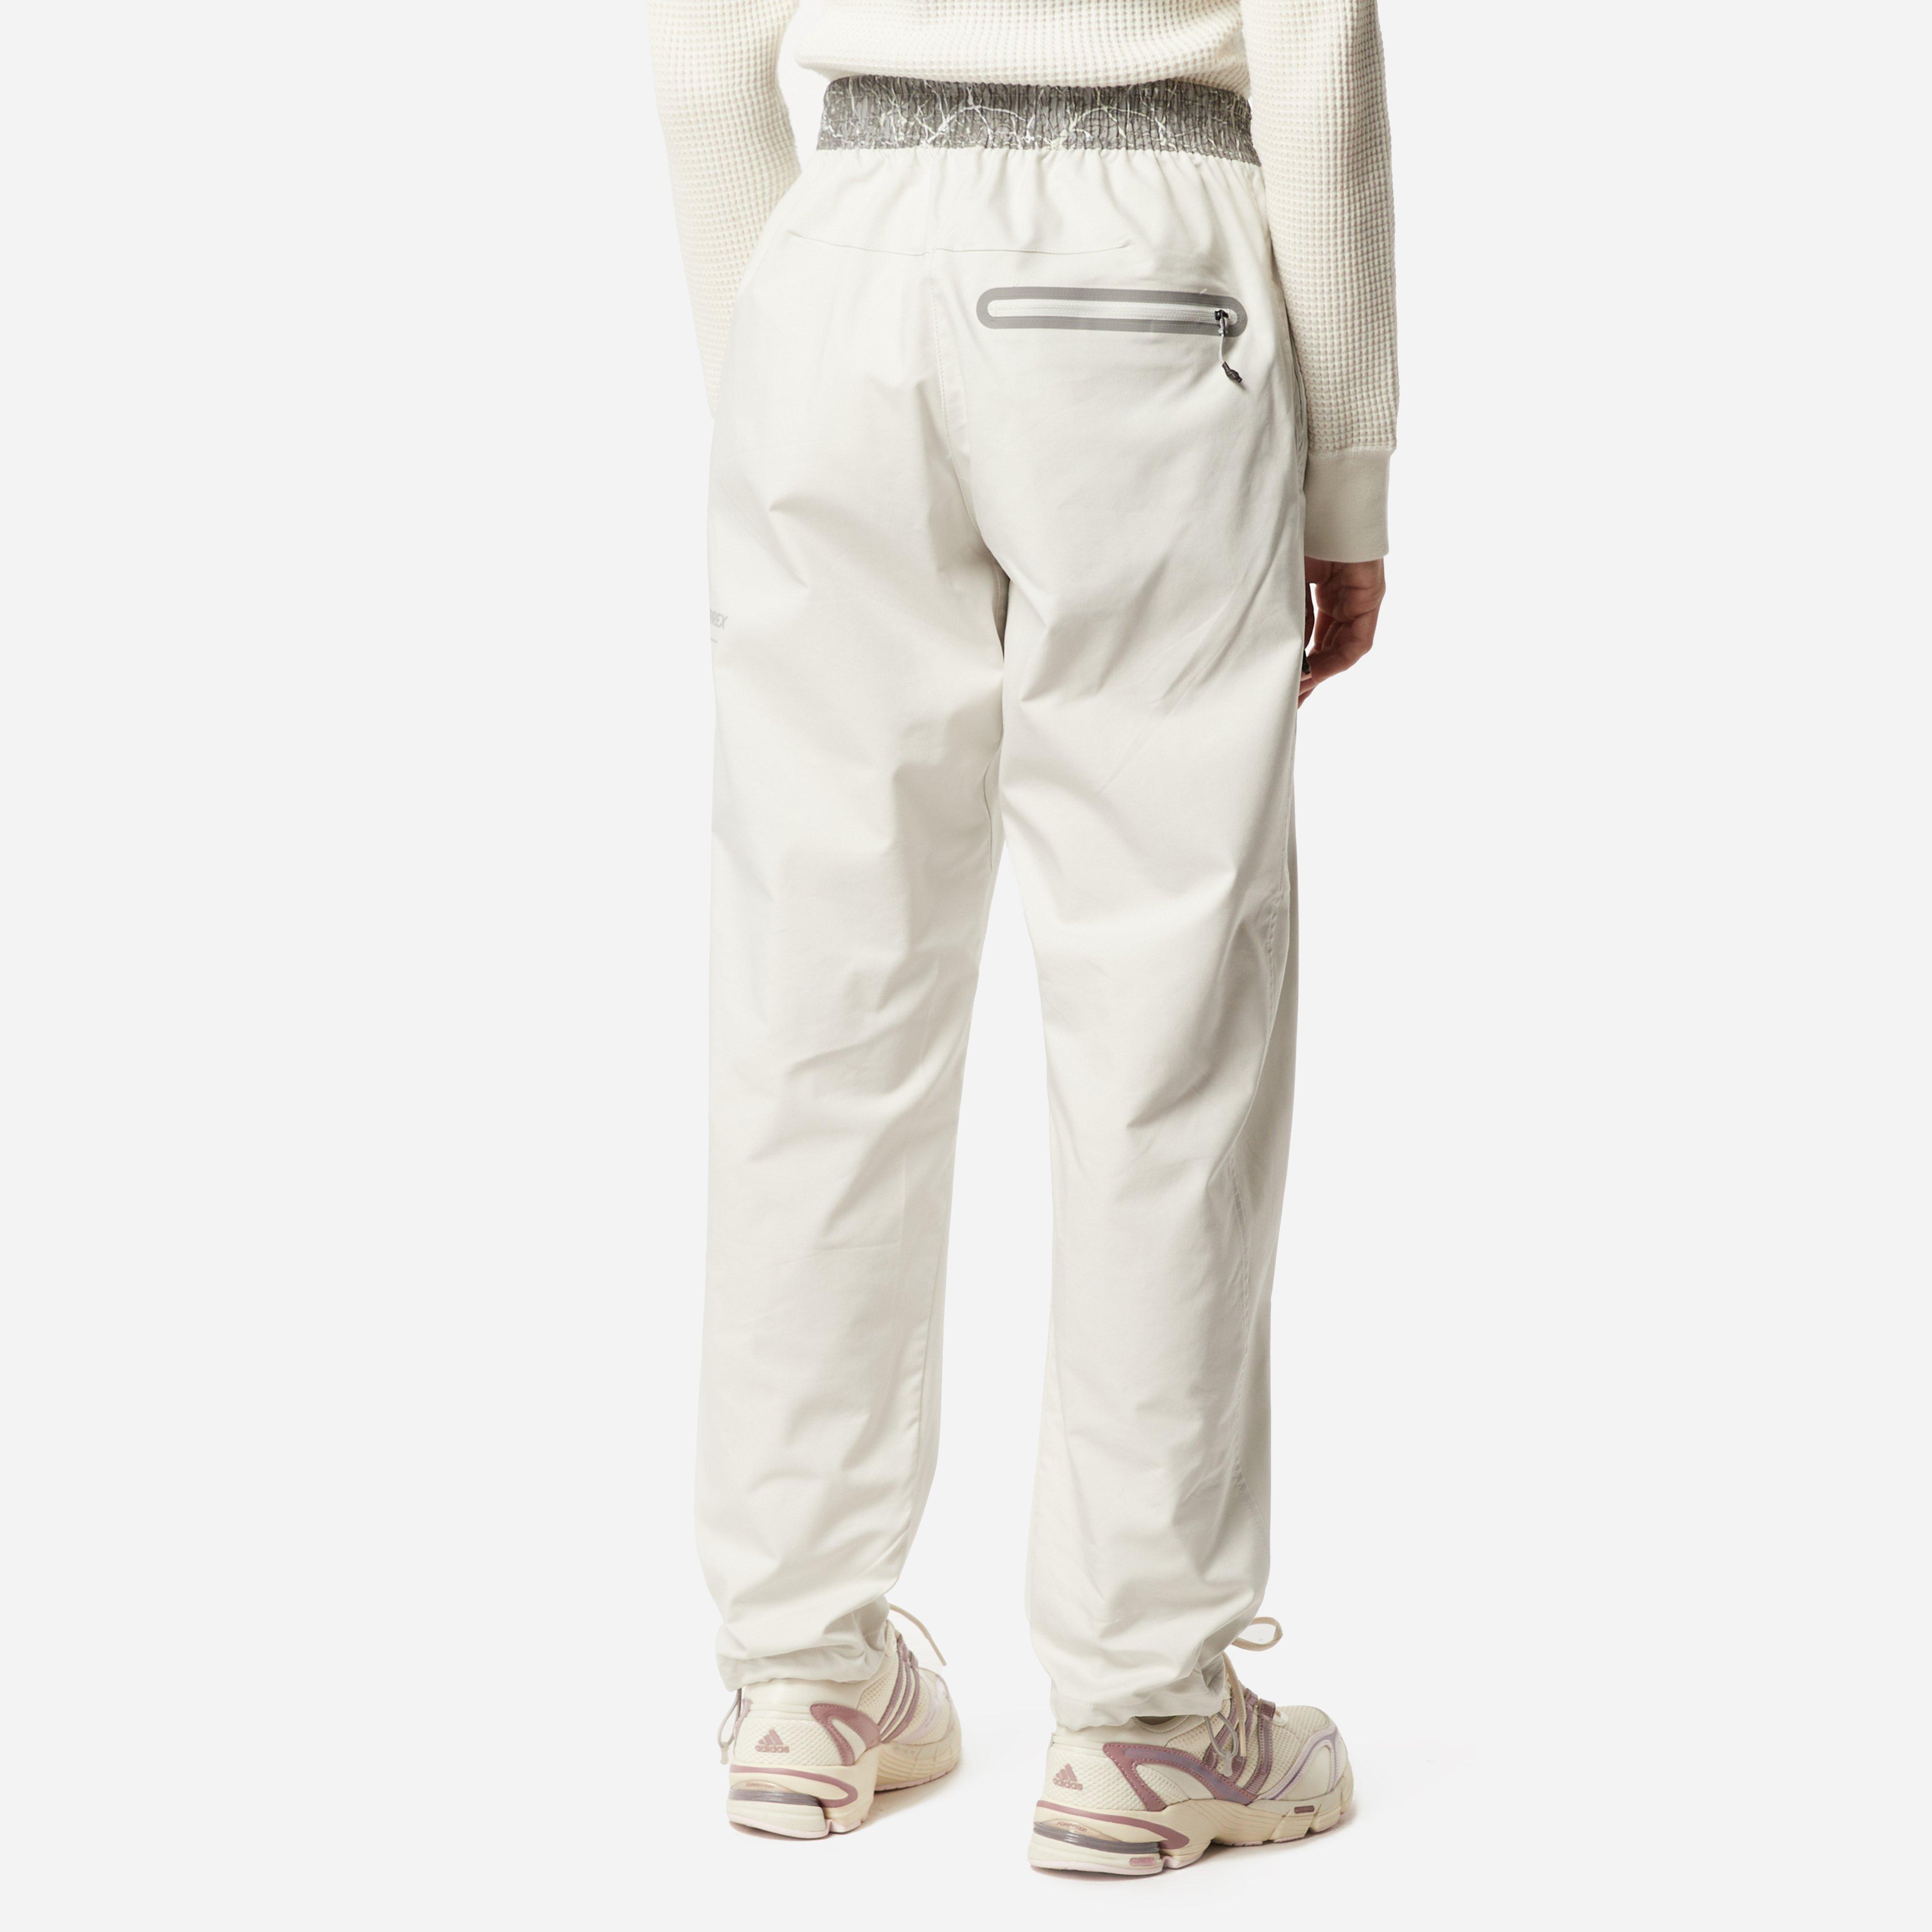 adidas Originals X And Wander Loose Pant Women's in White | Lyst